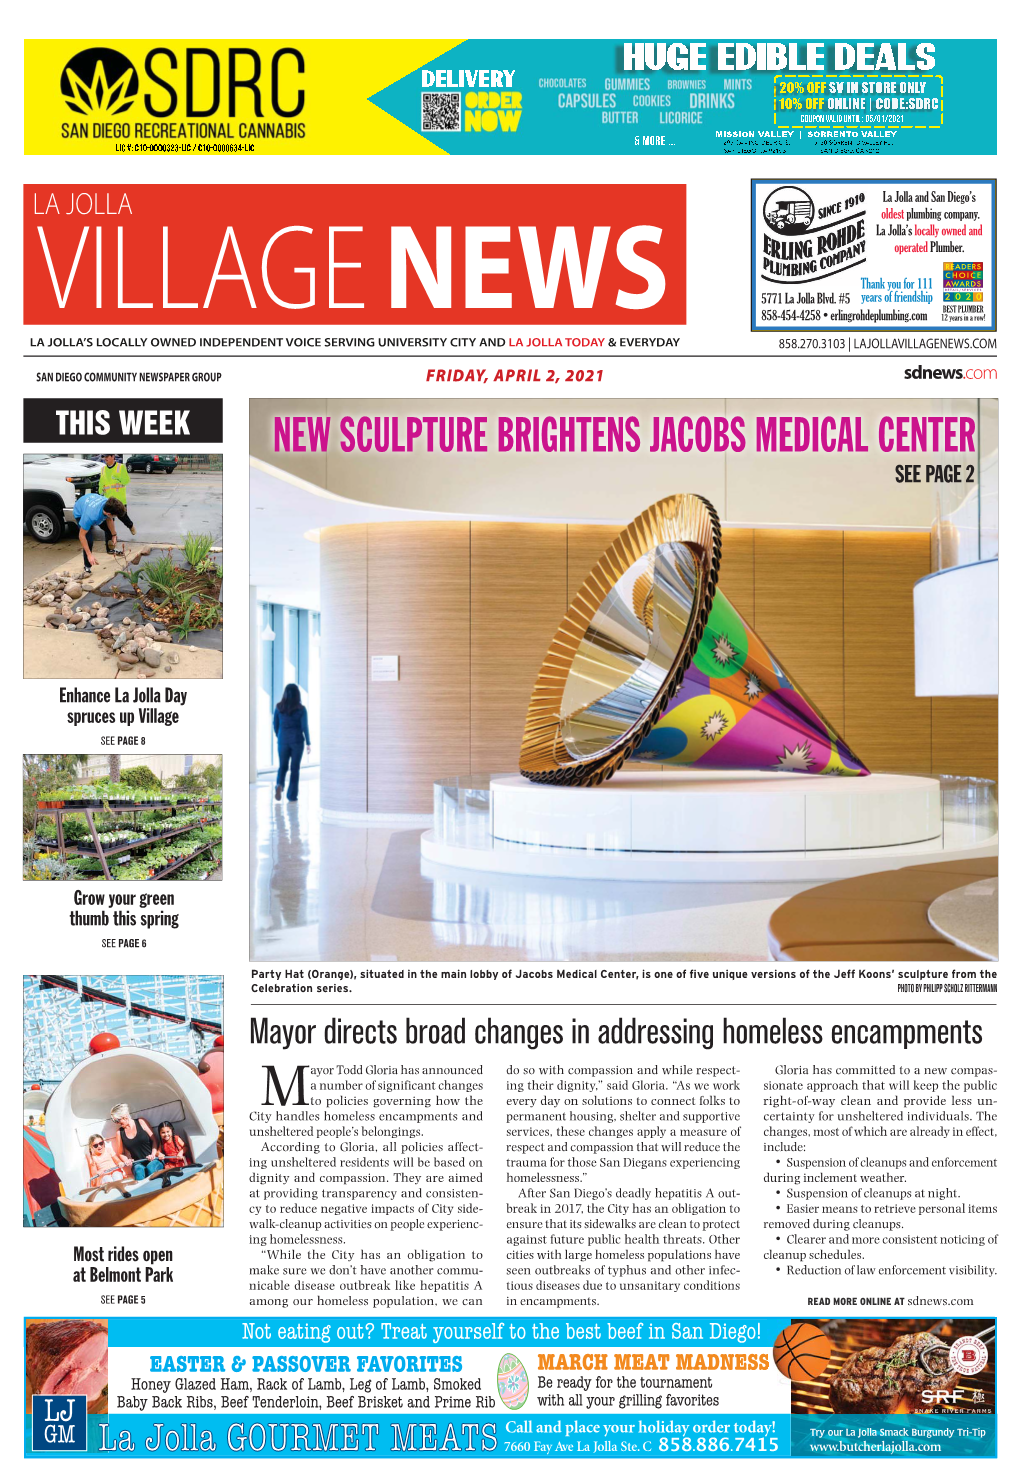 New Sculpture Brightens Jacobs Medical Center See Page 2